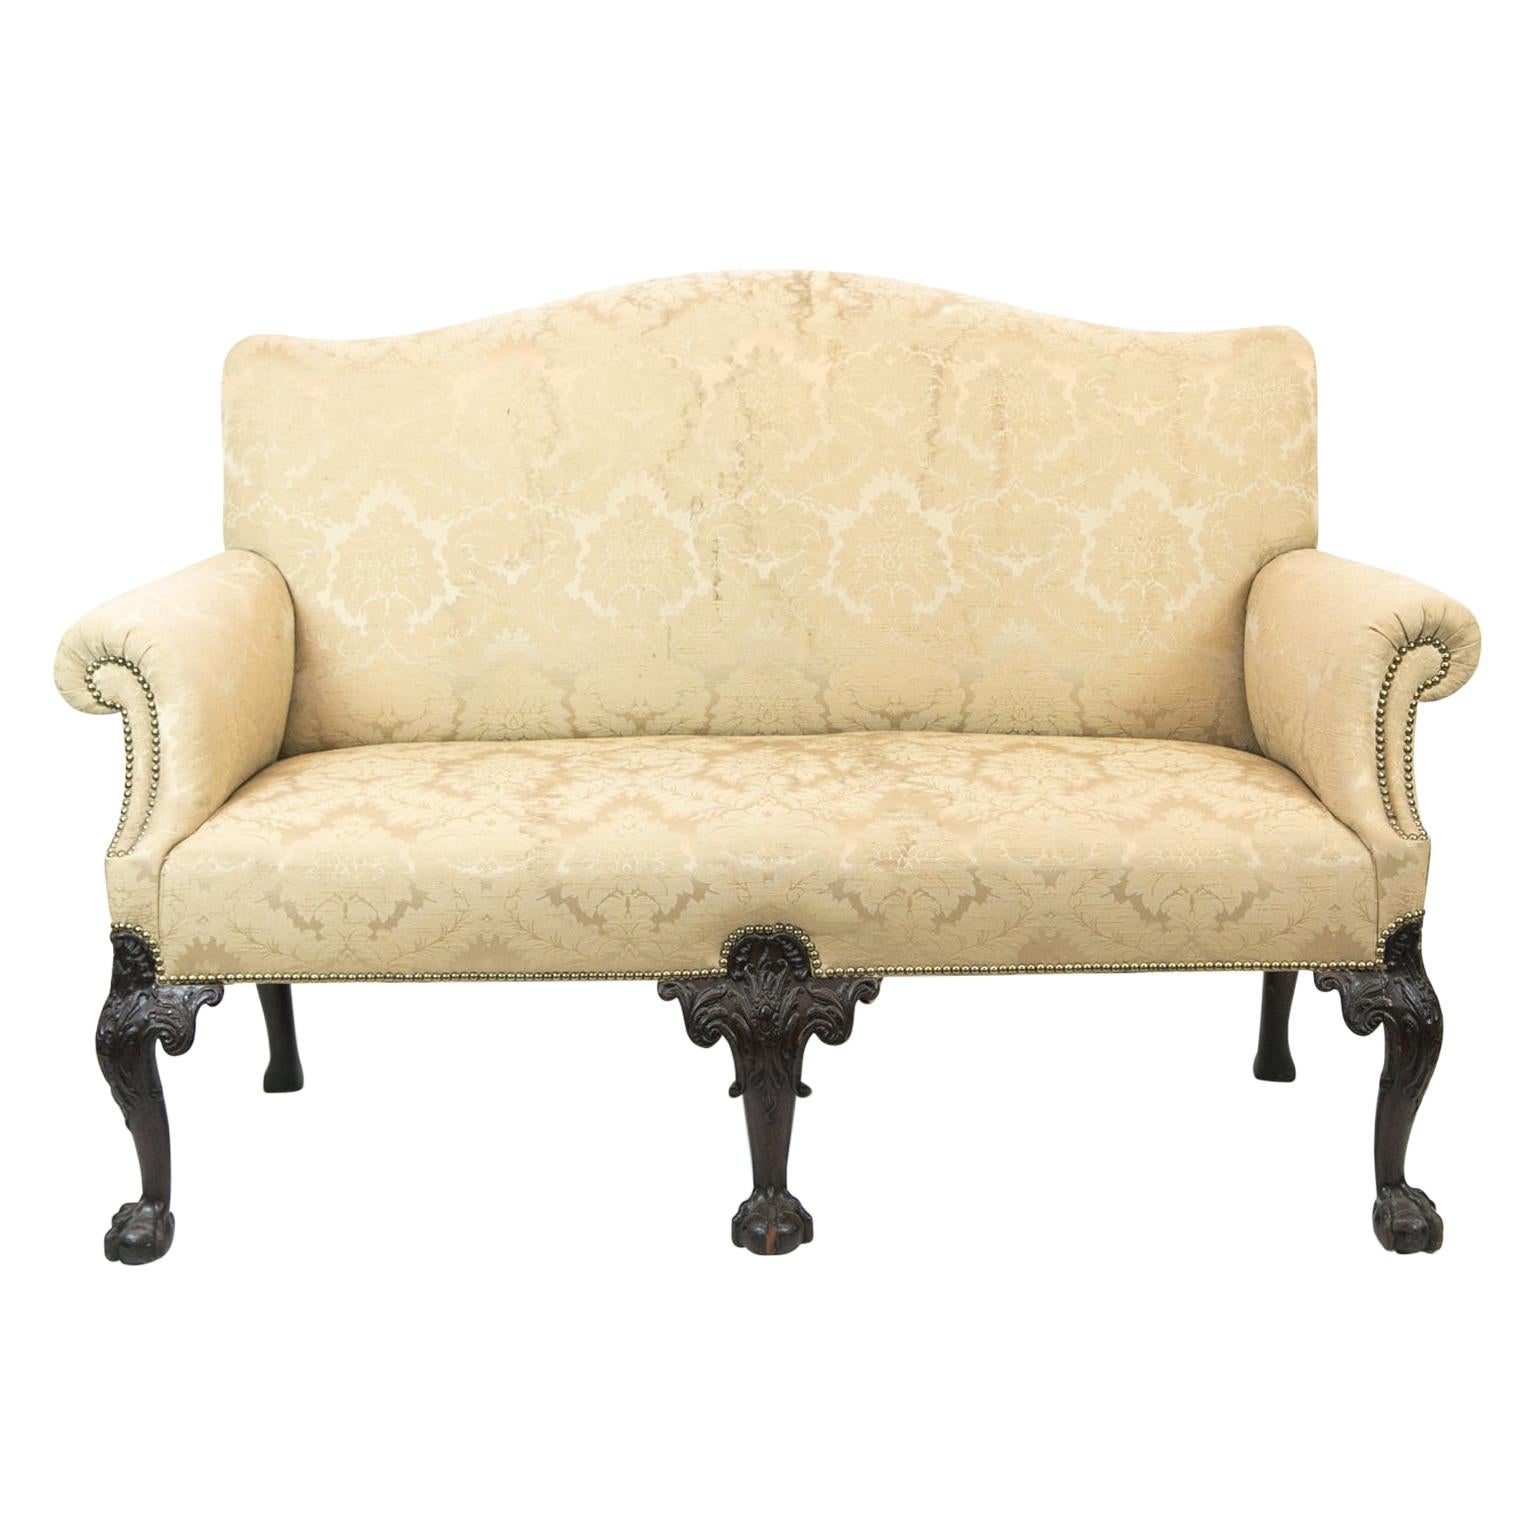 English Chippendale Style Upholstered Settee